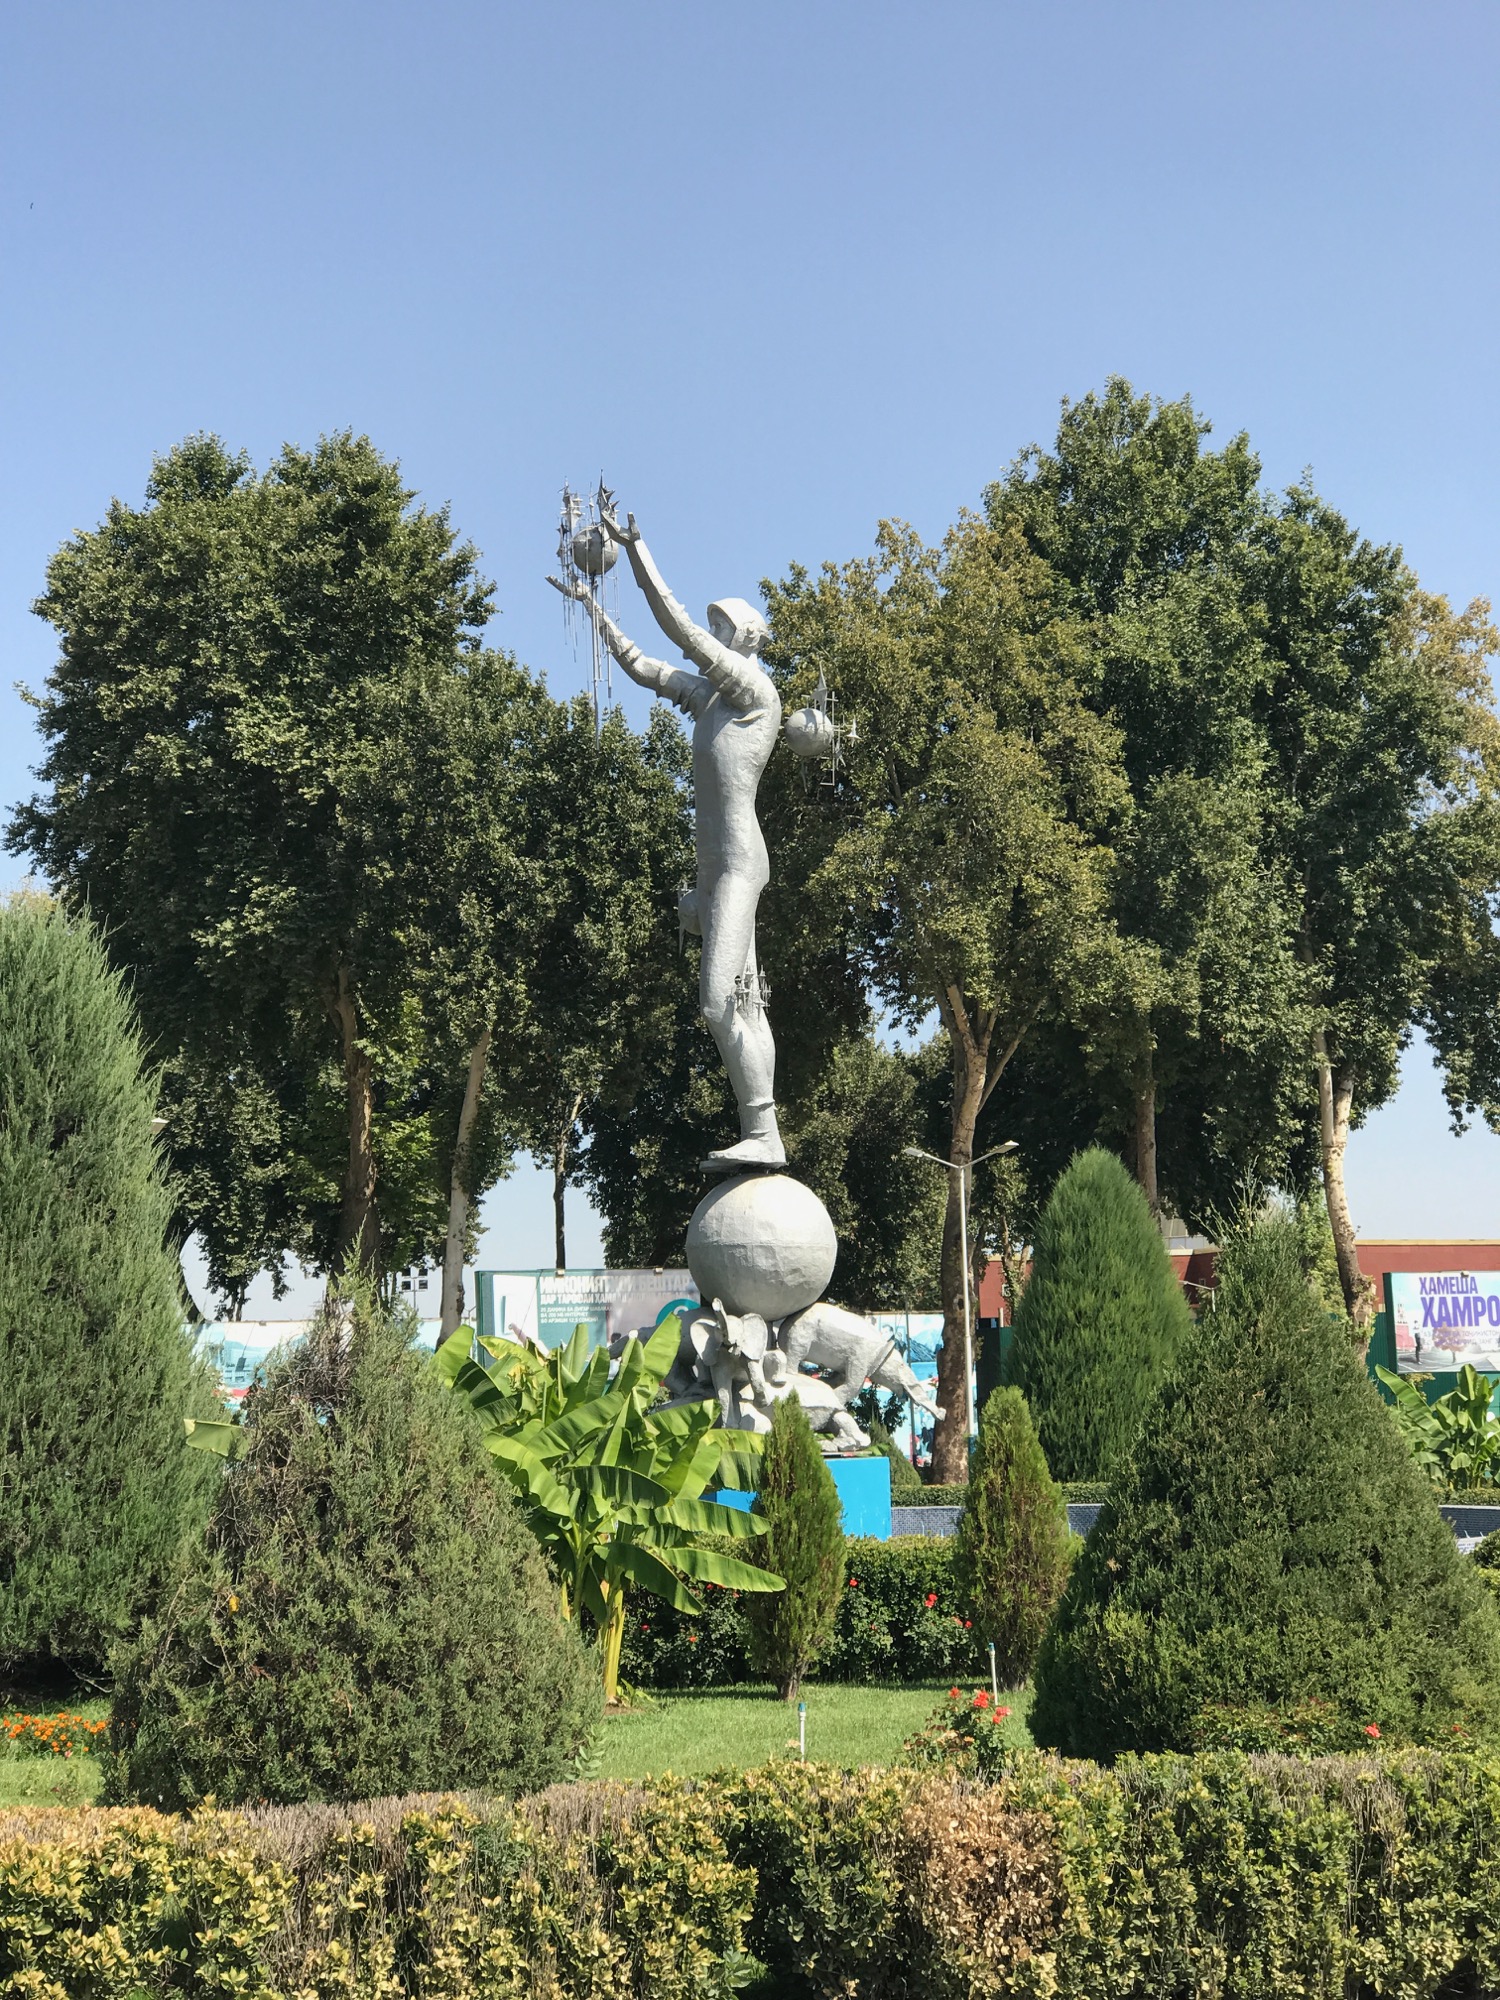 a statue of a man holding a ball and a ball with trees in the background